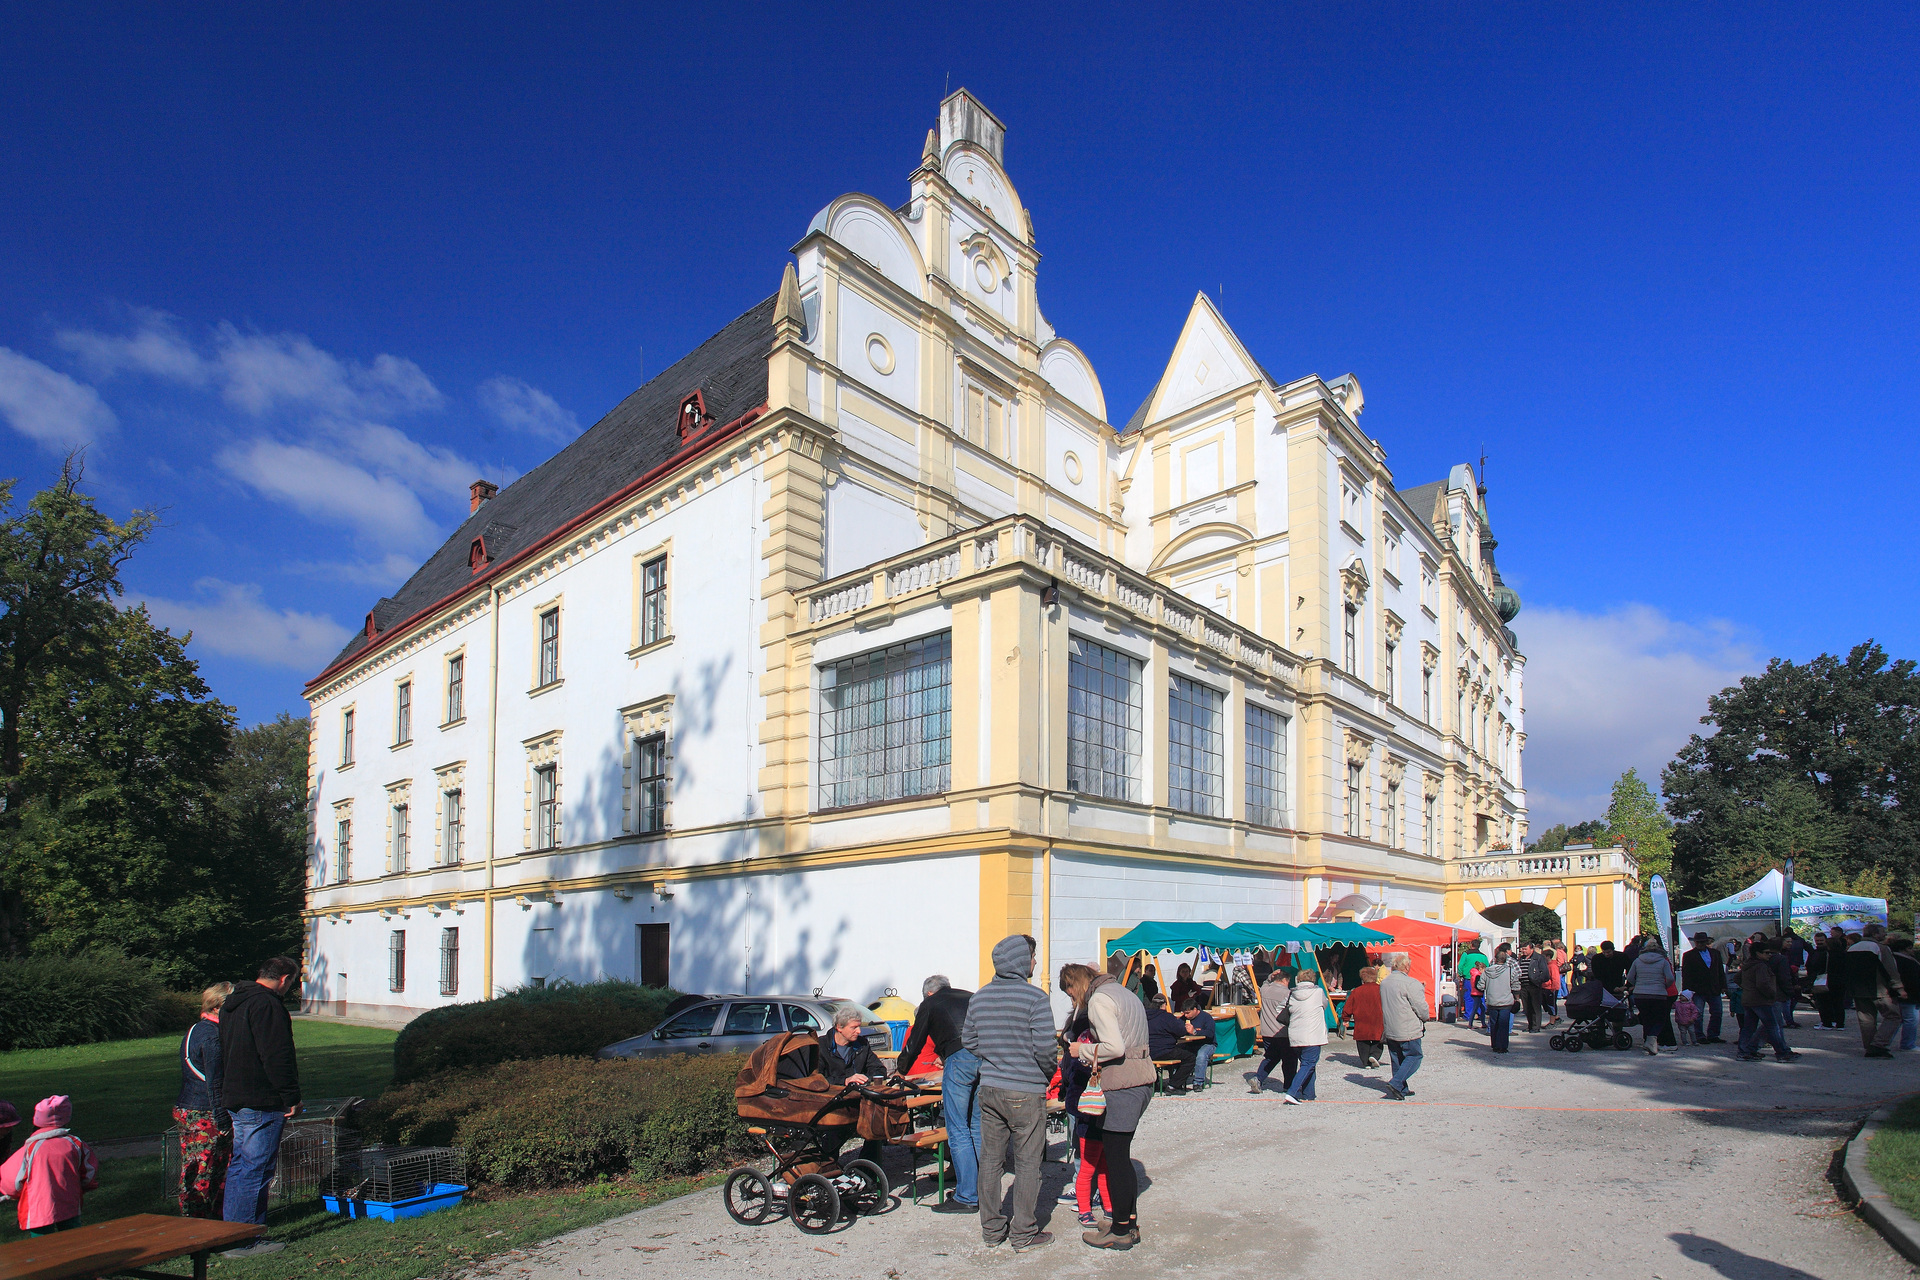 The chateau museum in Bartošovice